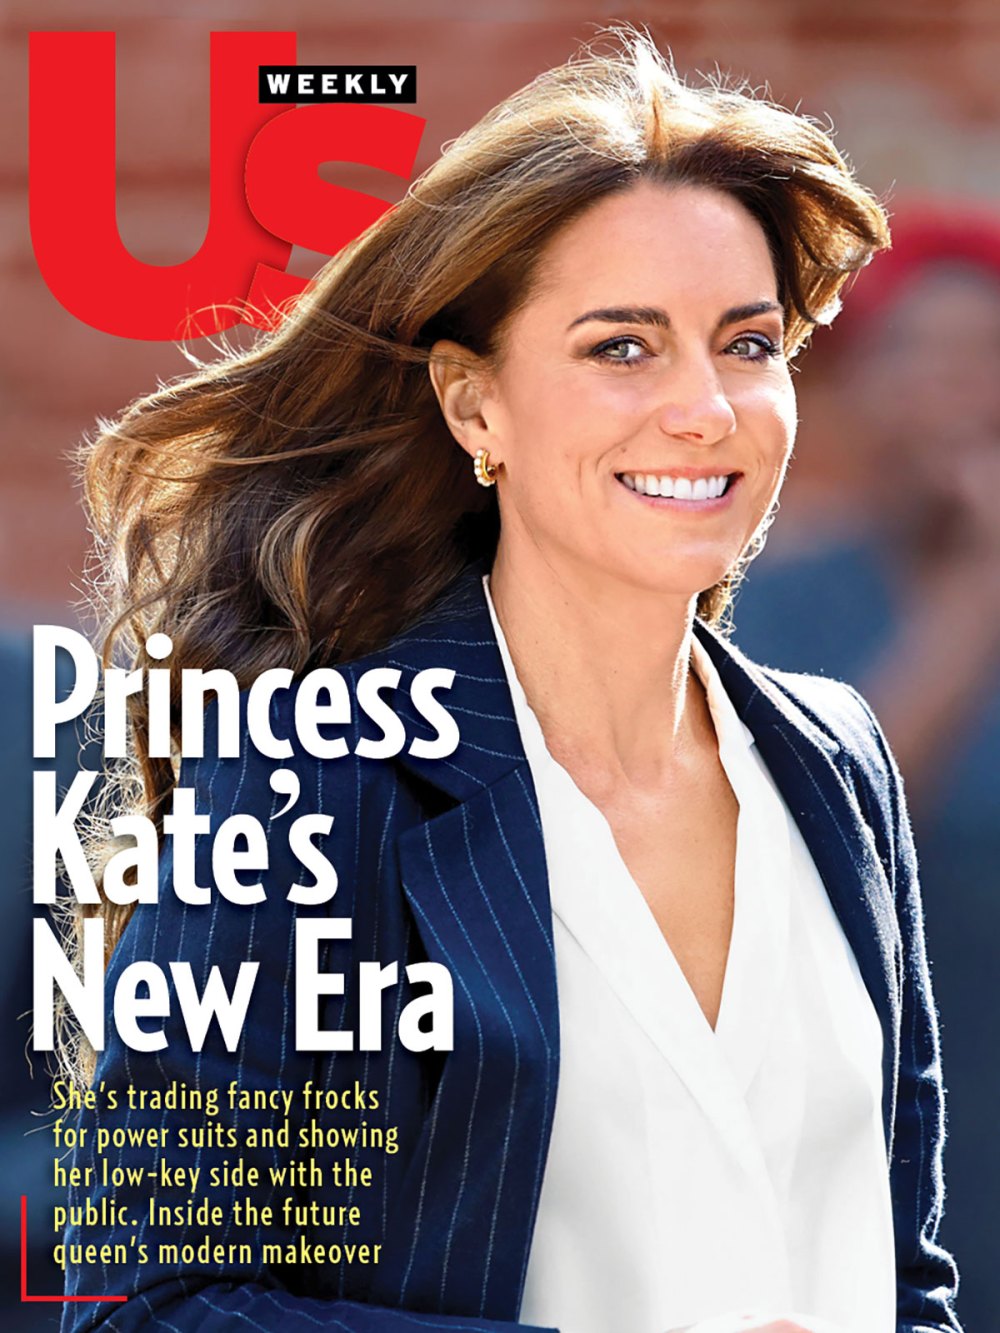 Cover Image Kate Middleton Us Weekly Cover Story 2347